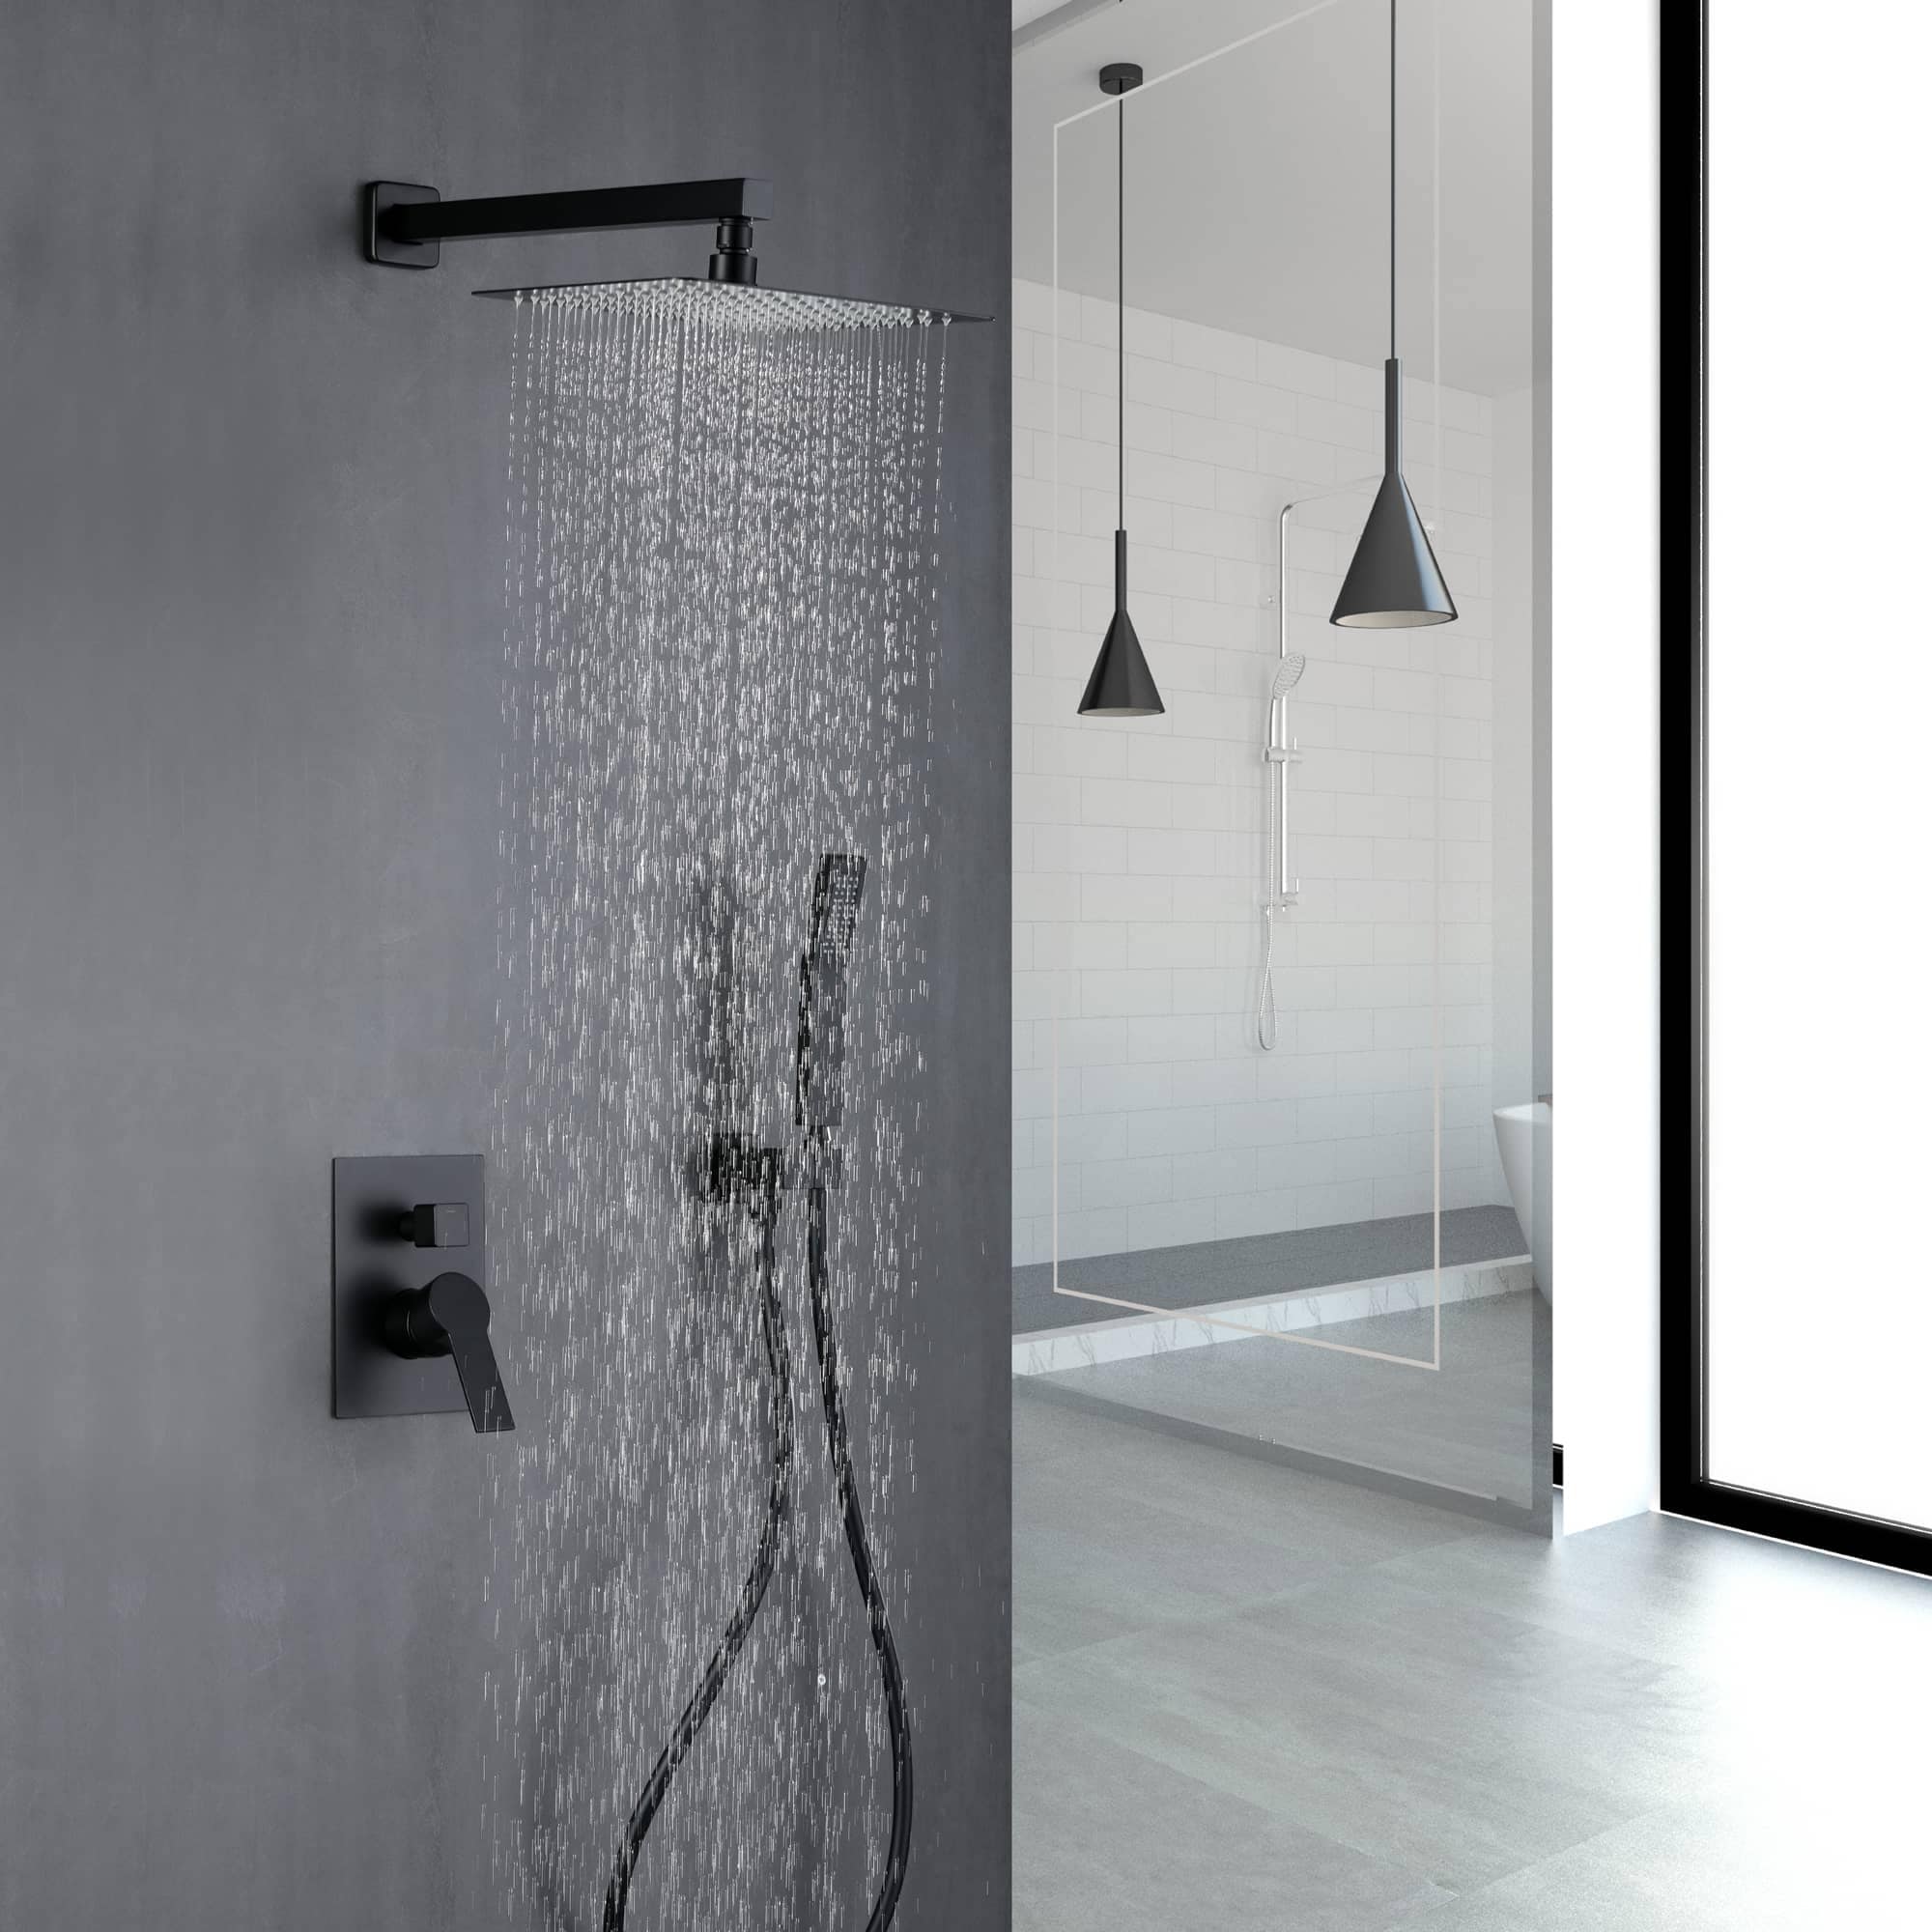 https://ak1.ostkcdn.com/images/products/is/images/direct/bef970ccd15c97202d099a44a6b87627a99b8000/Wall-Mounted-Shower-Faucet-With-Hand-Shower-Modern-Shower-System-Set-10-Inch-Rainfall-Shower-Head-With-Pressure-Balance-Valve.jpg